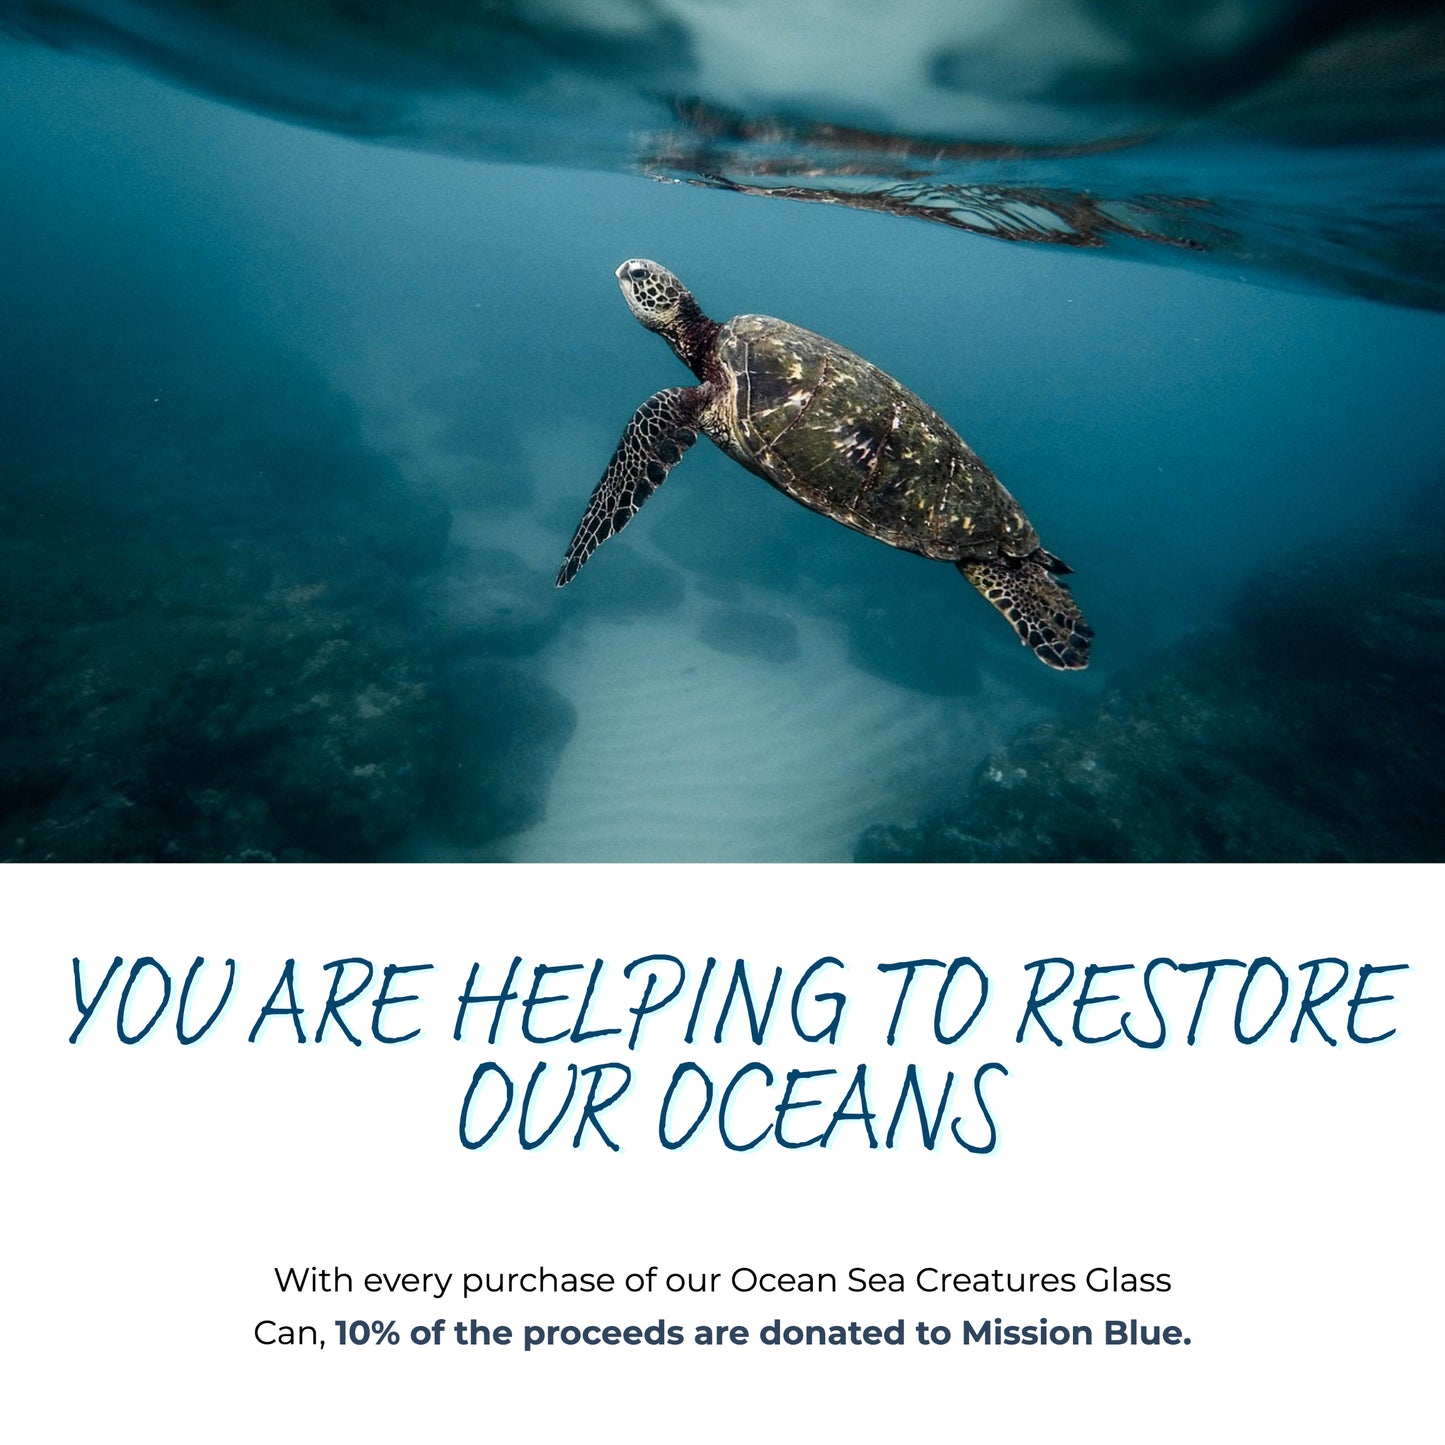 You are helping to restore our oceans. With every purchase of our Ocean Sea Creatures Glass Can, 10% of the net proceeds are donated to Mission Blue to continue their efforts in creating marine protected areas, or &quot;Hope Spots&quot;